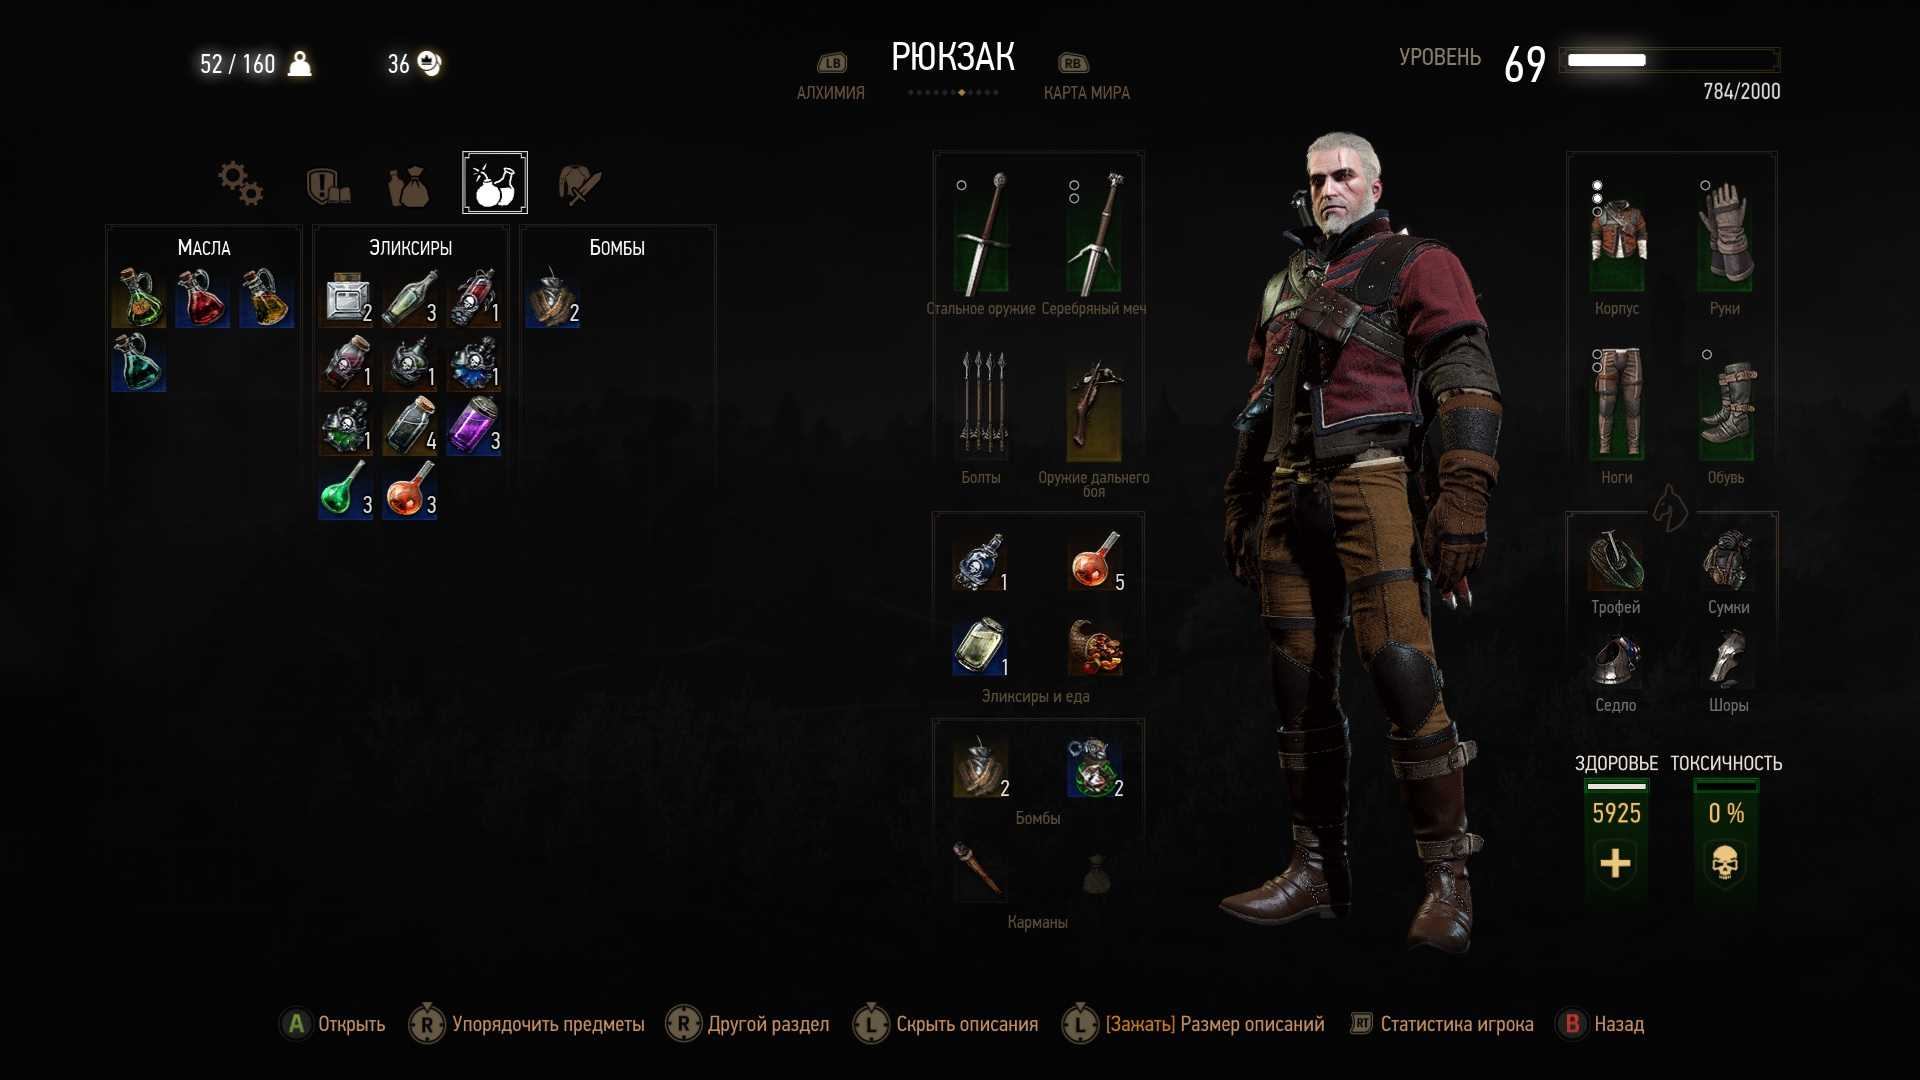 The witcher 3 console commands: how to become the fantasy horse whisperer